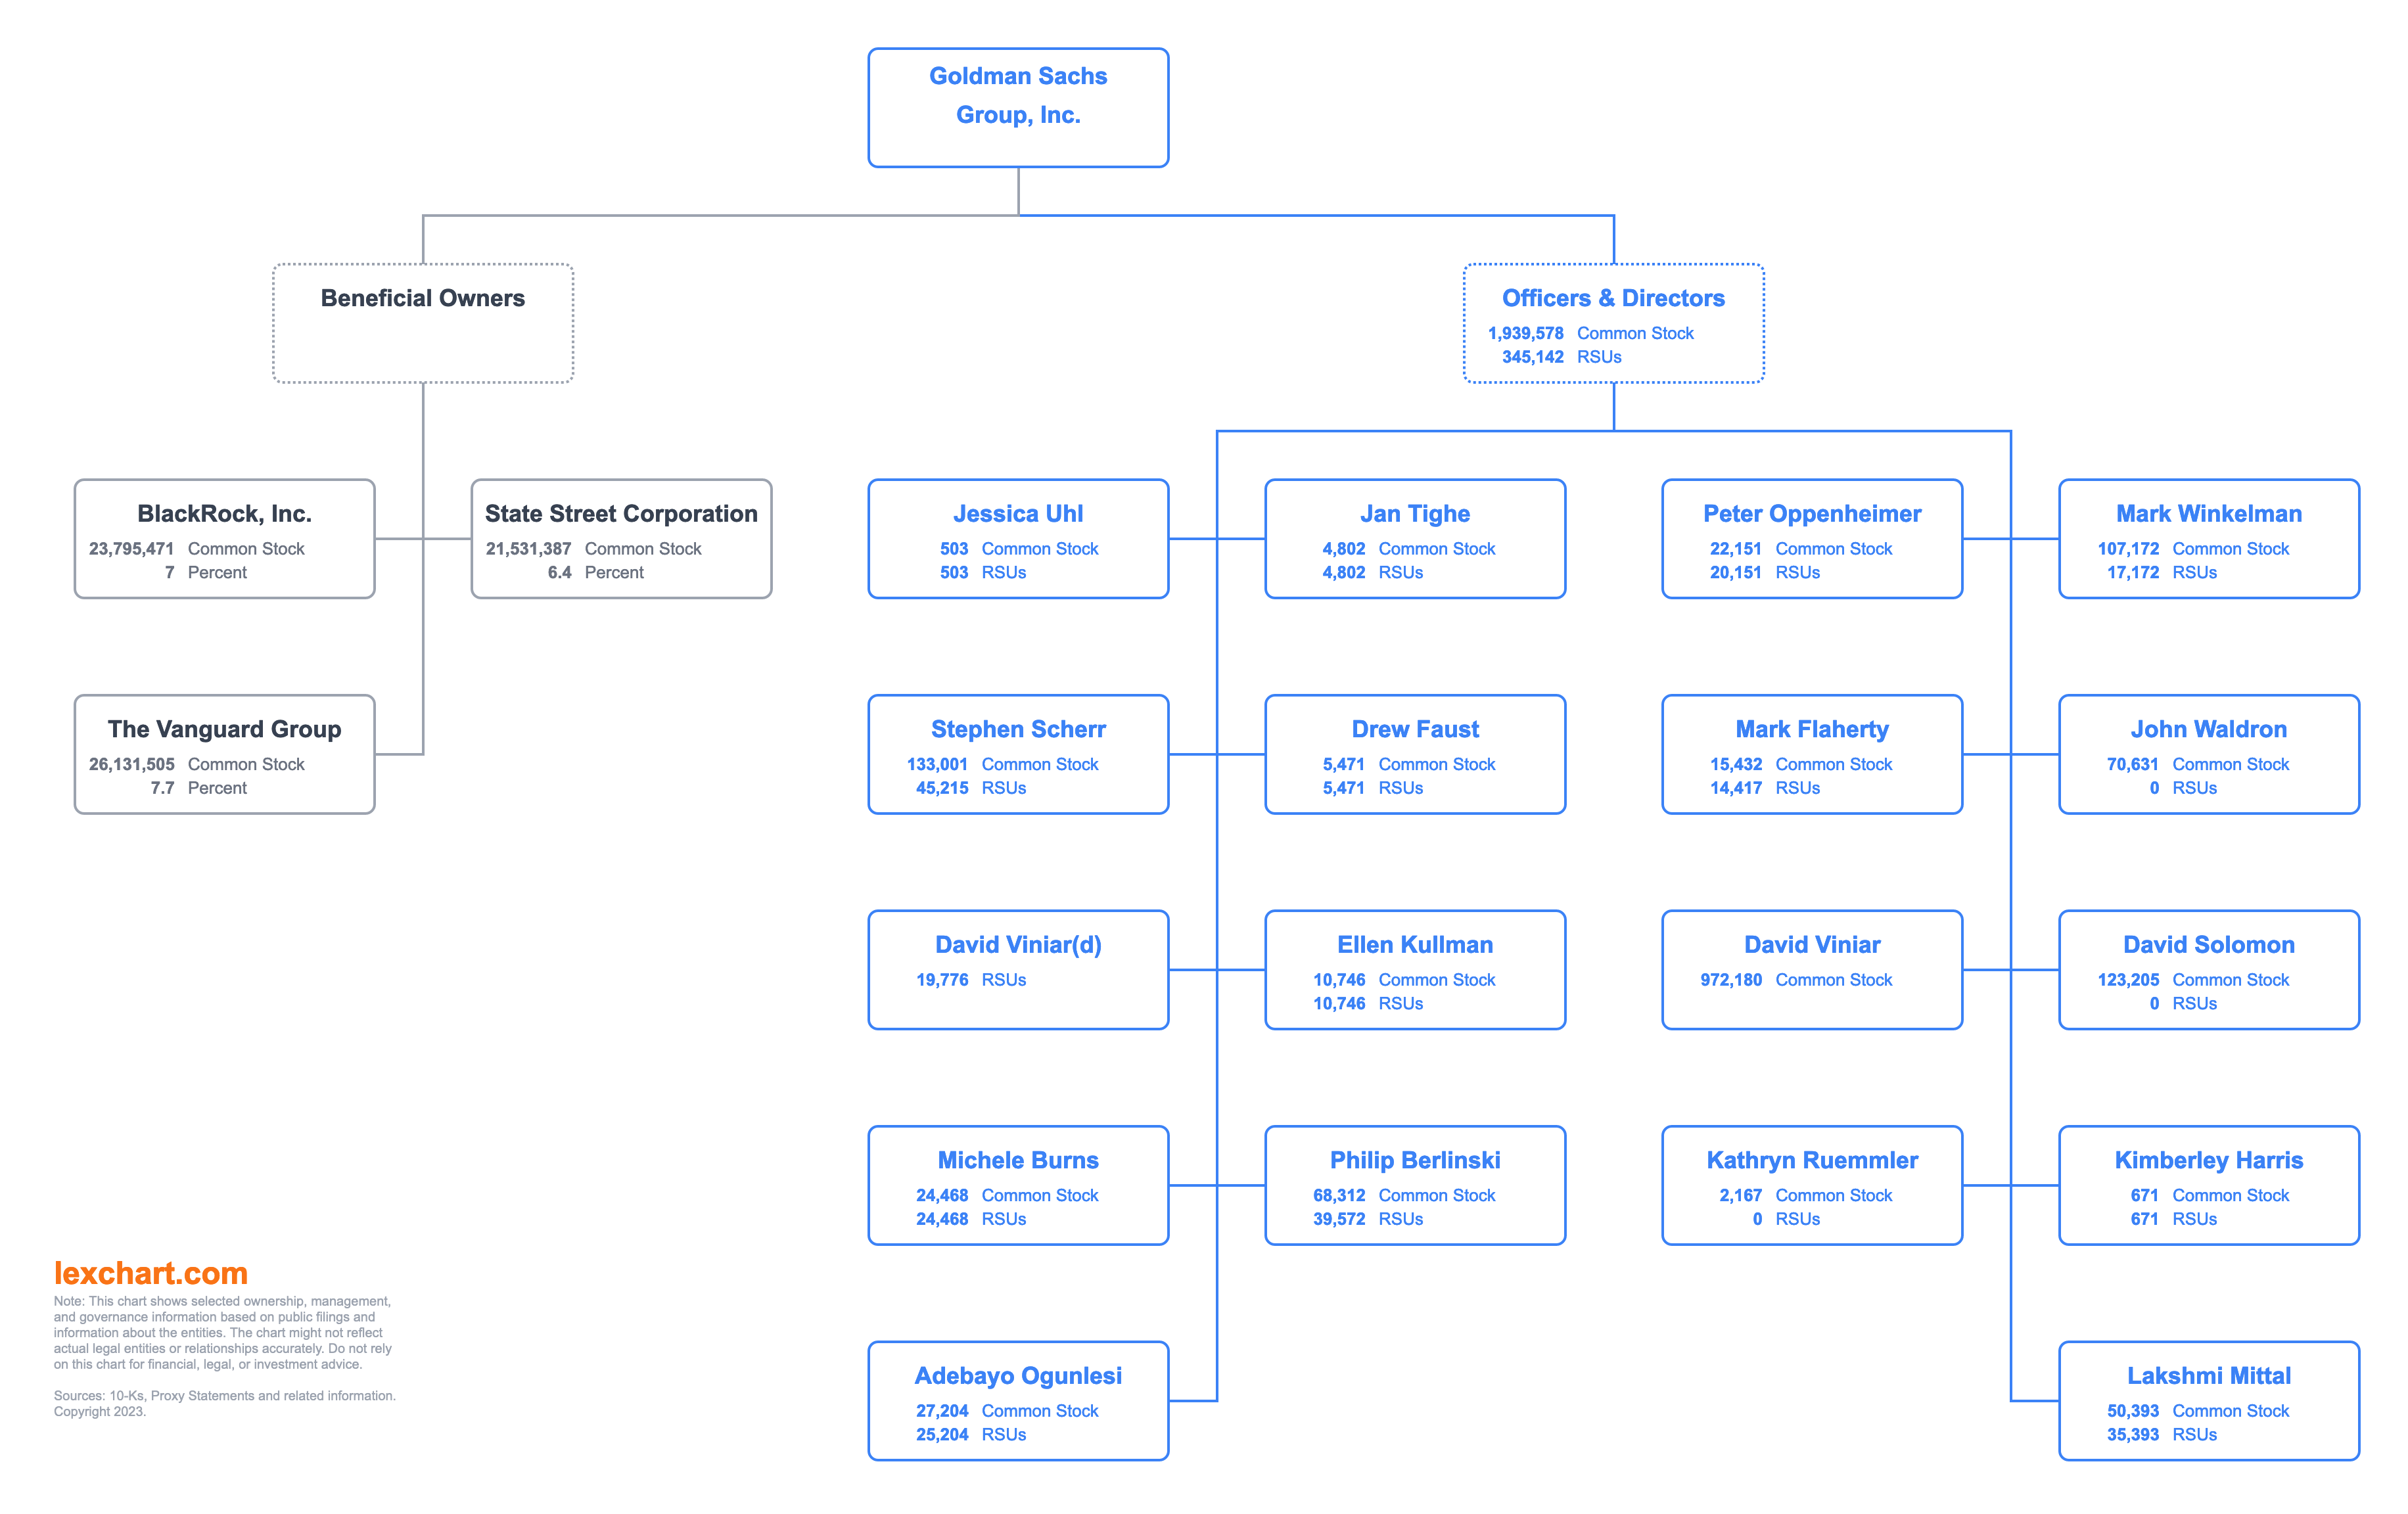 Goldman Sachs ownership structure chart with beneficial owners, officers, and directors